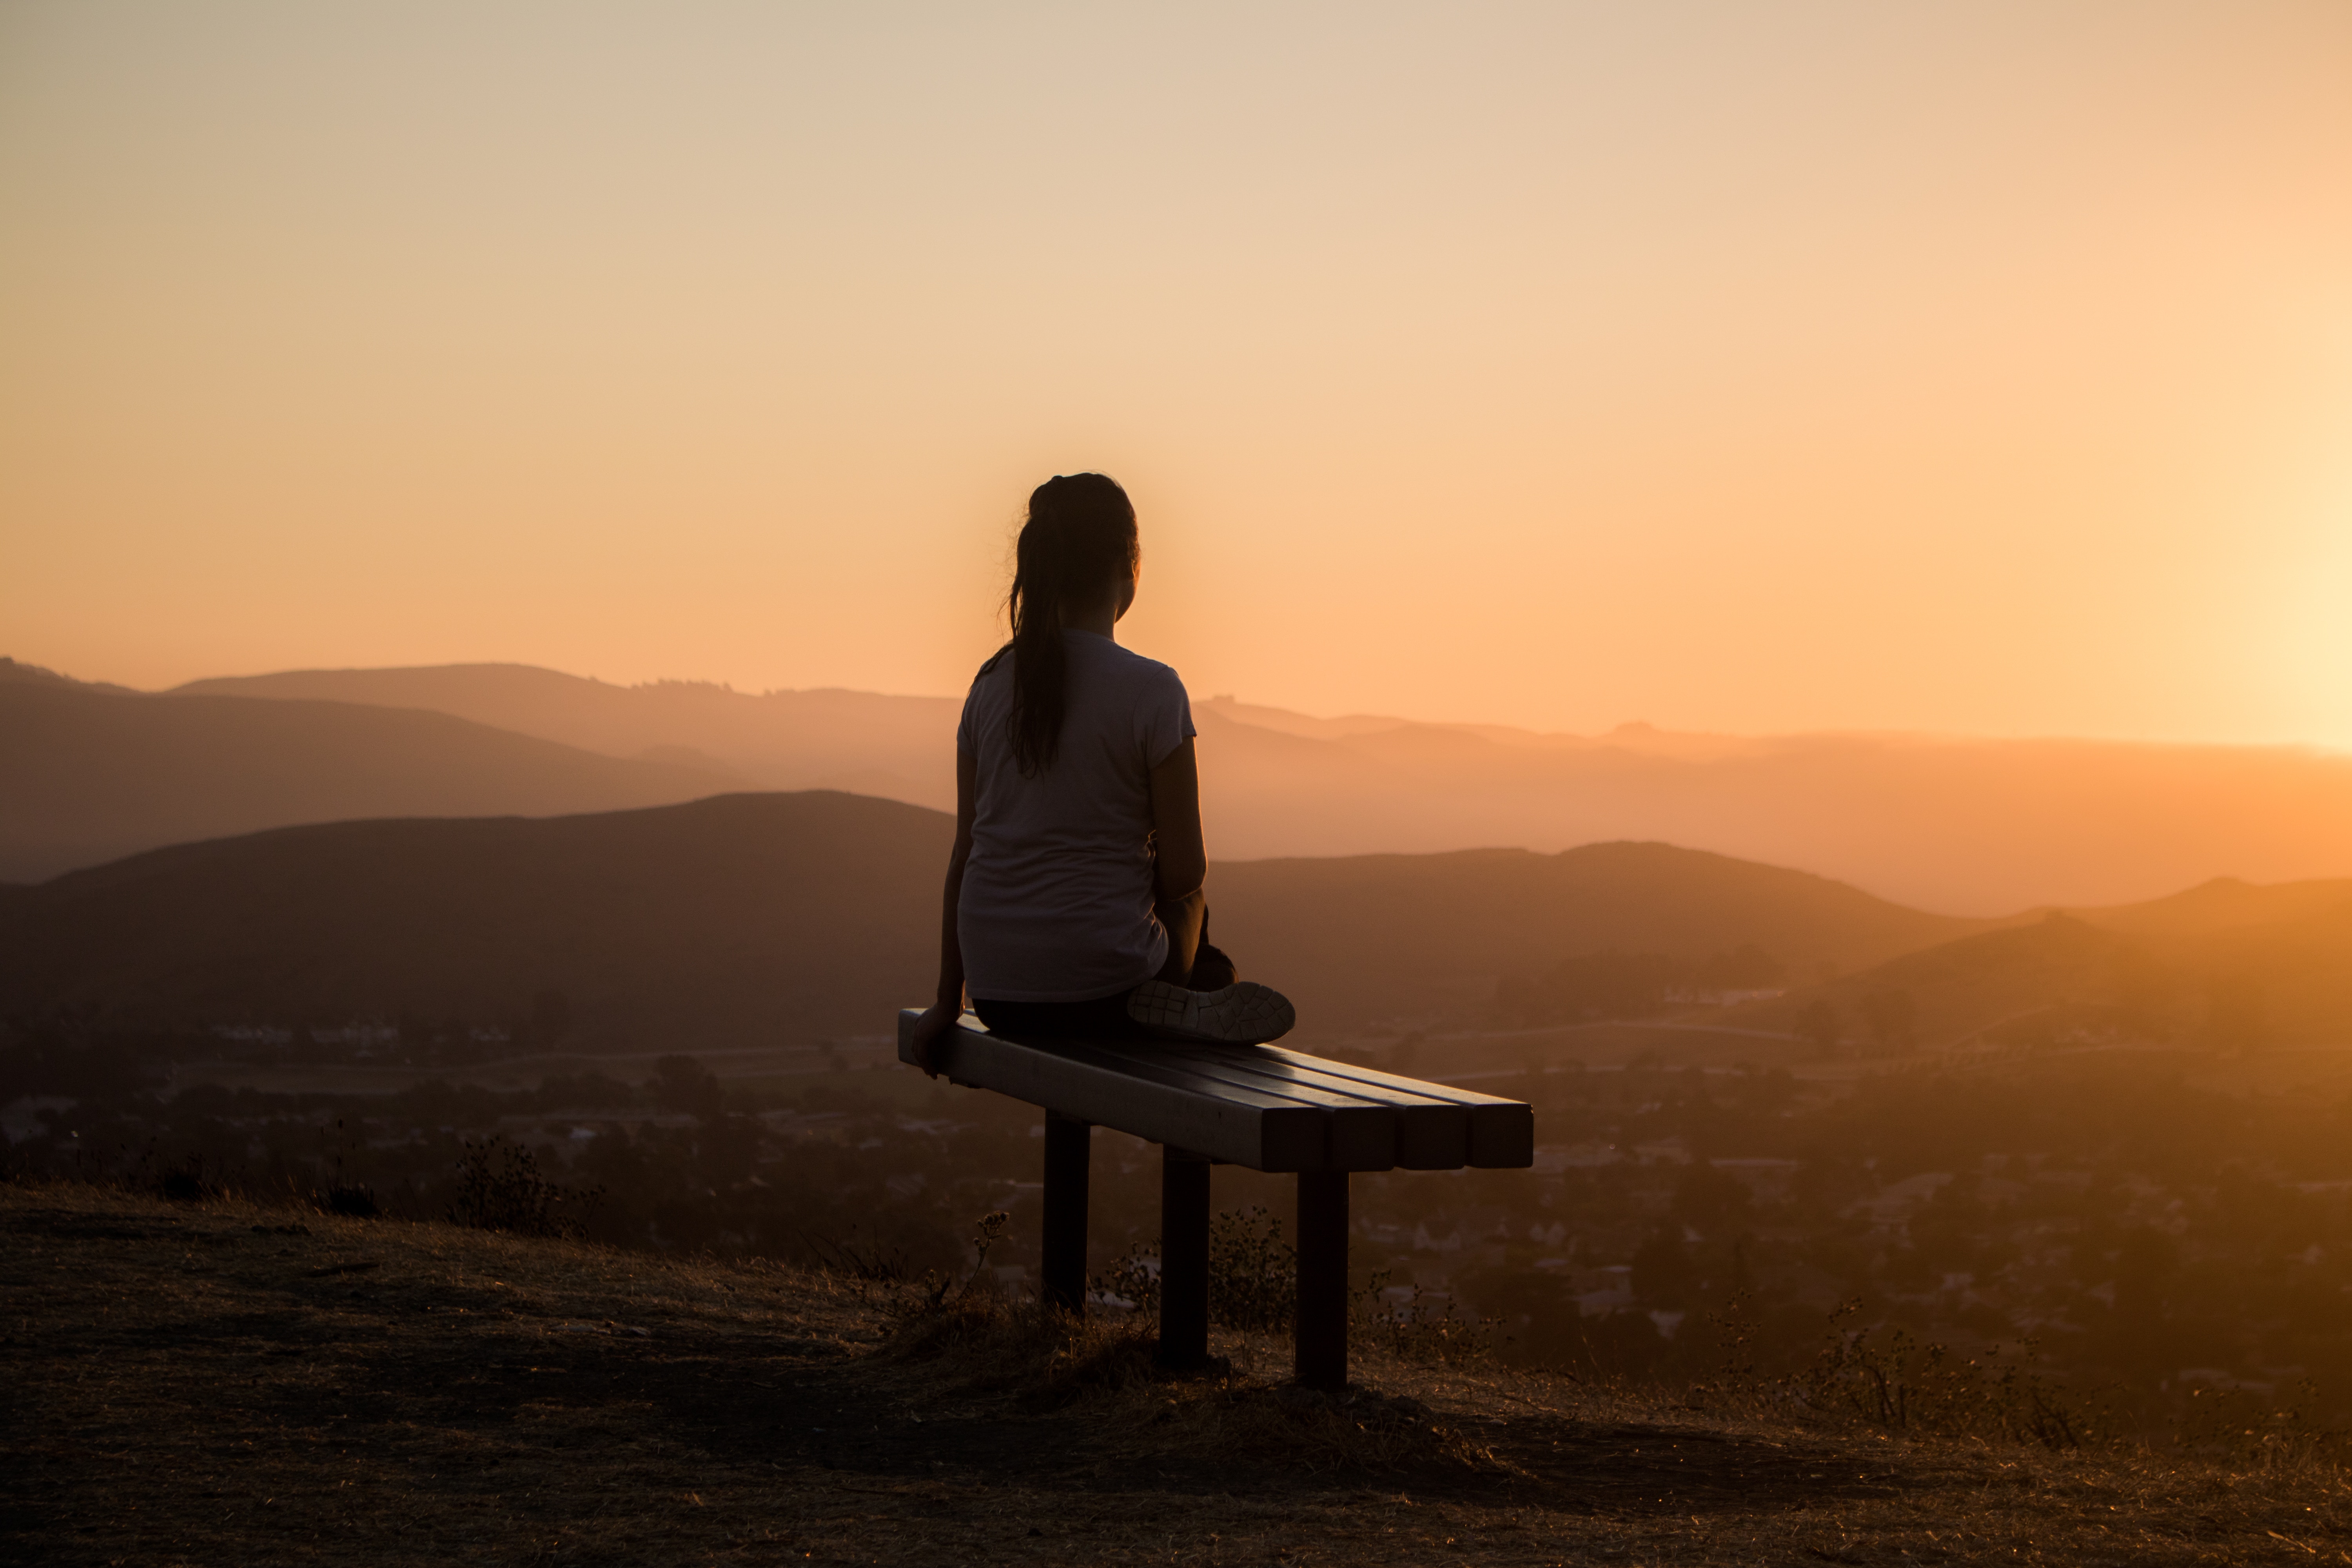 privacy, loneliness, girl, bench, dark, sunset, mountains, seclusion